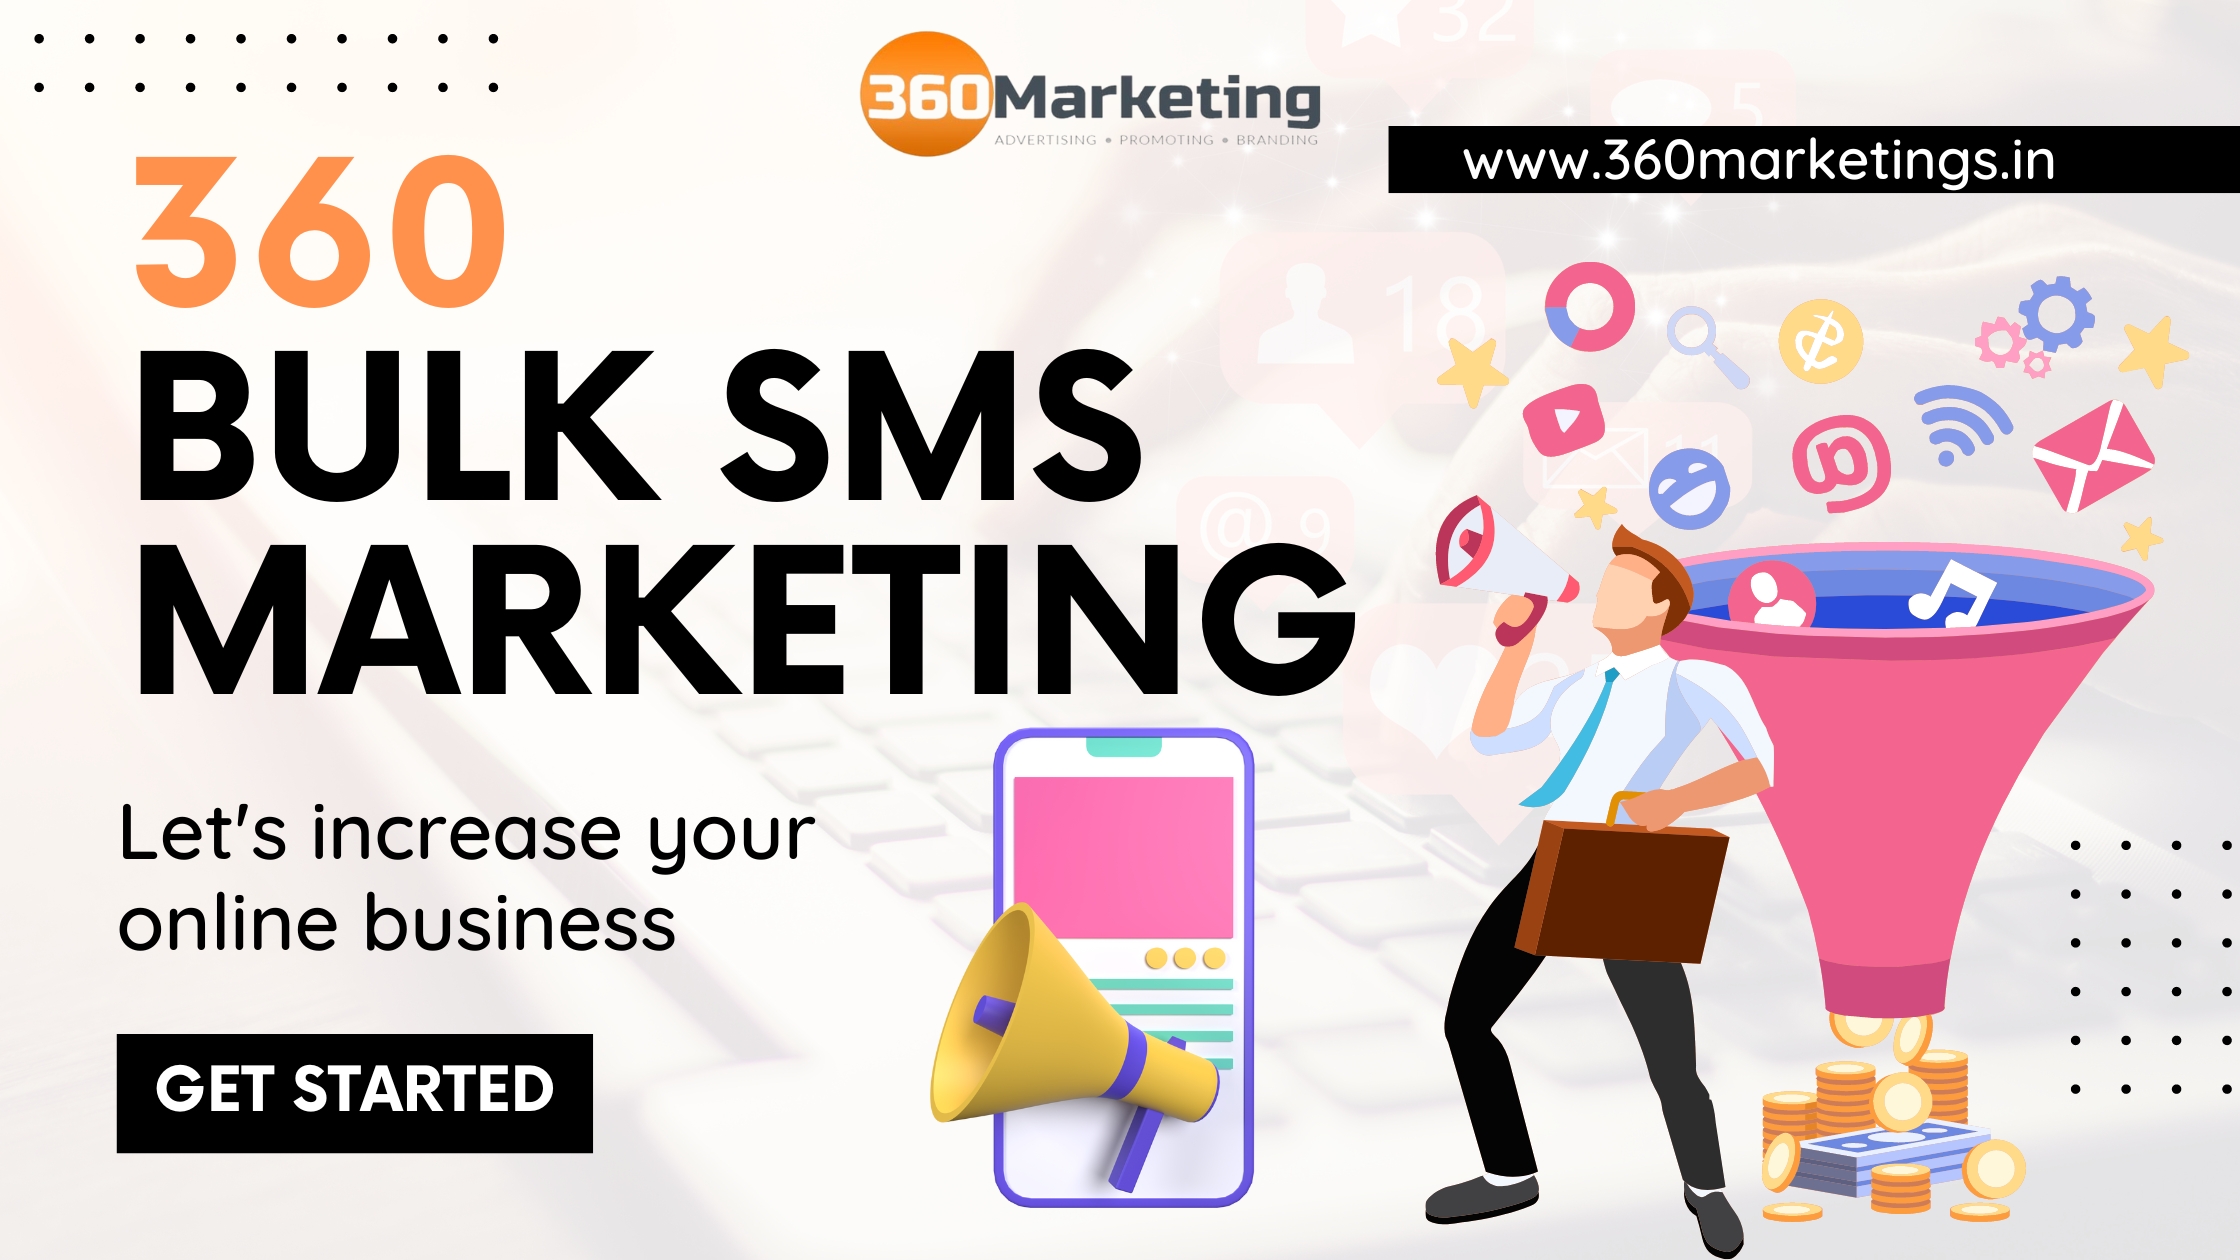 5 Effective Ways to Use Bulk SMS Services for Your Business